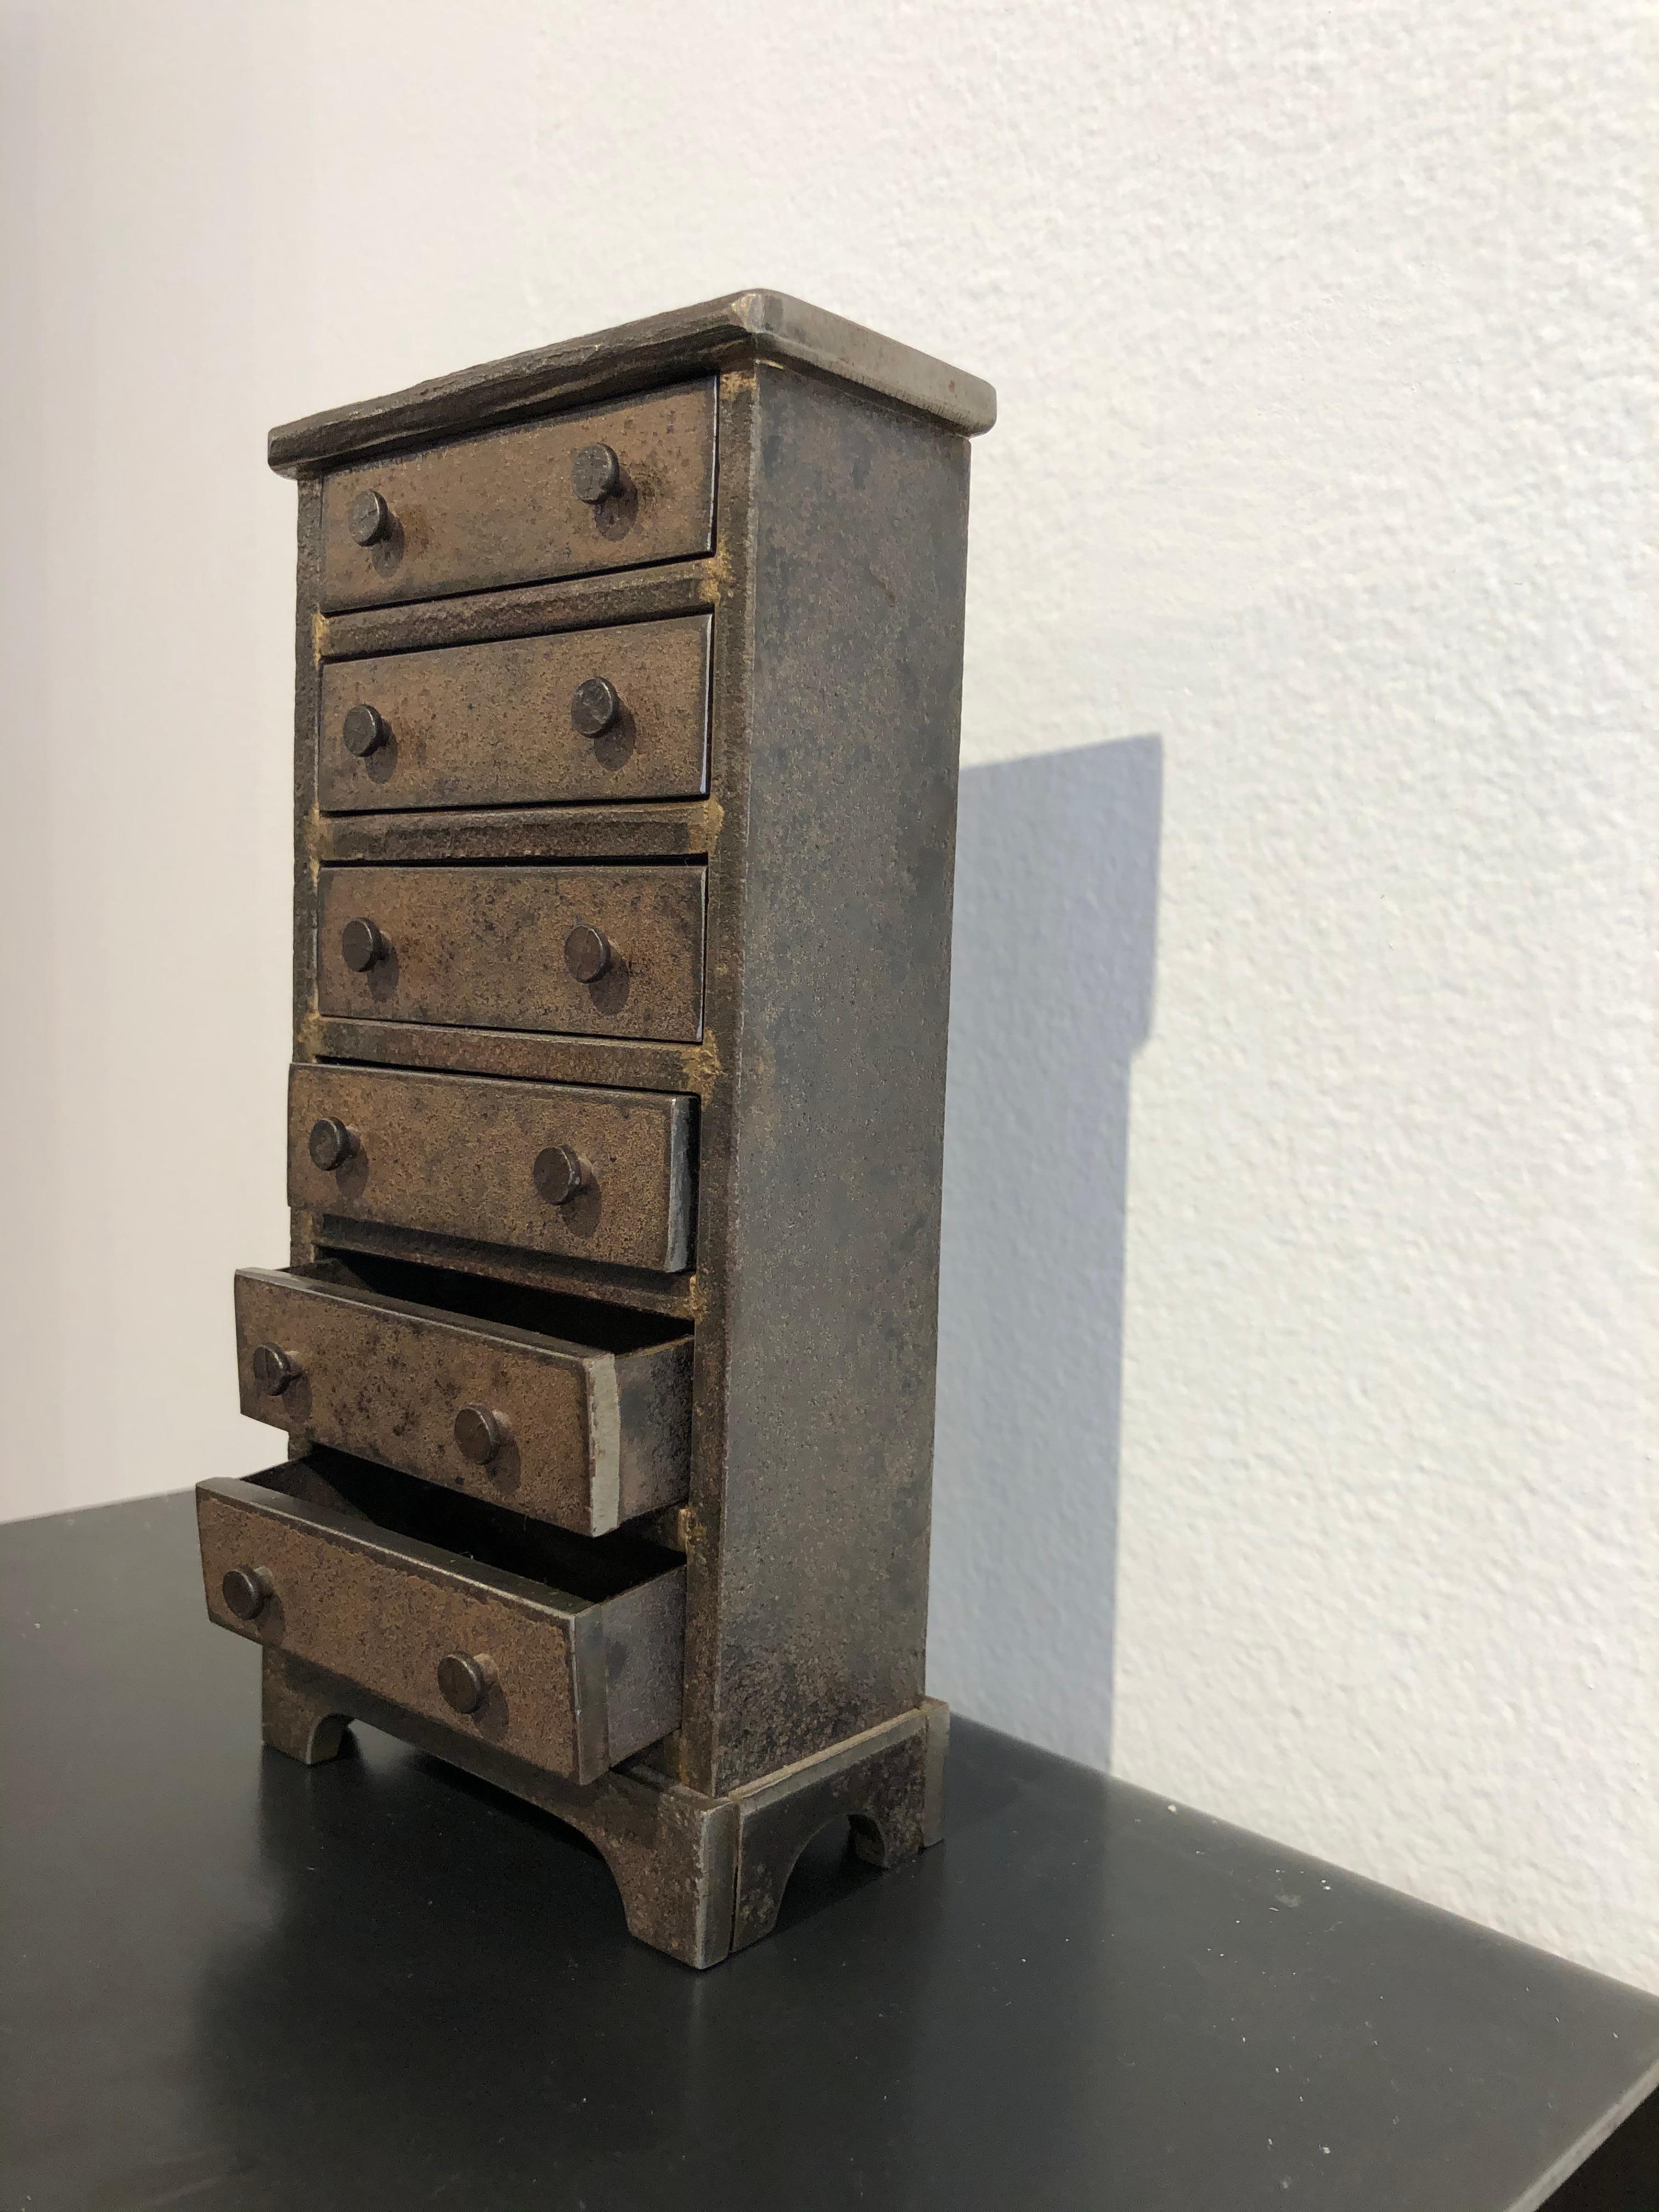 Welded Jim Rose Legacy Collection - Miniature Shaker Inspired Chest of Drawers Maquette